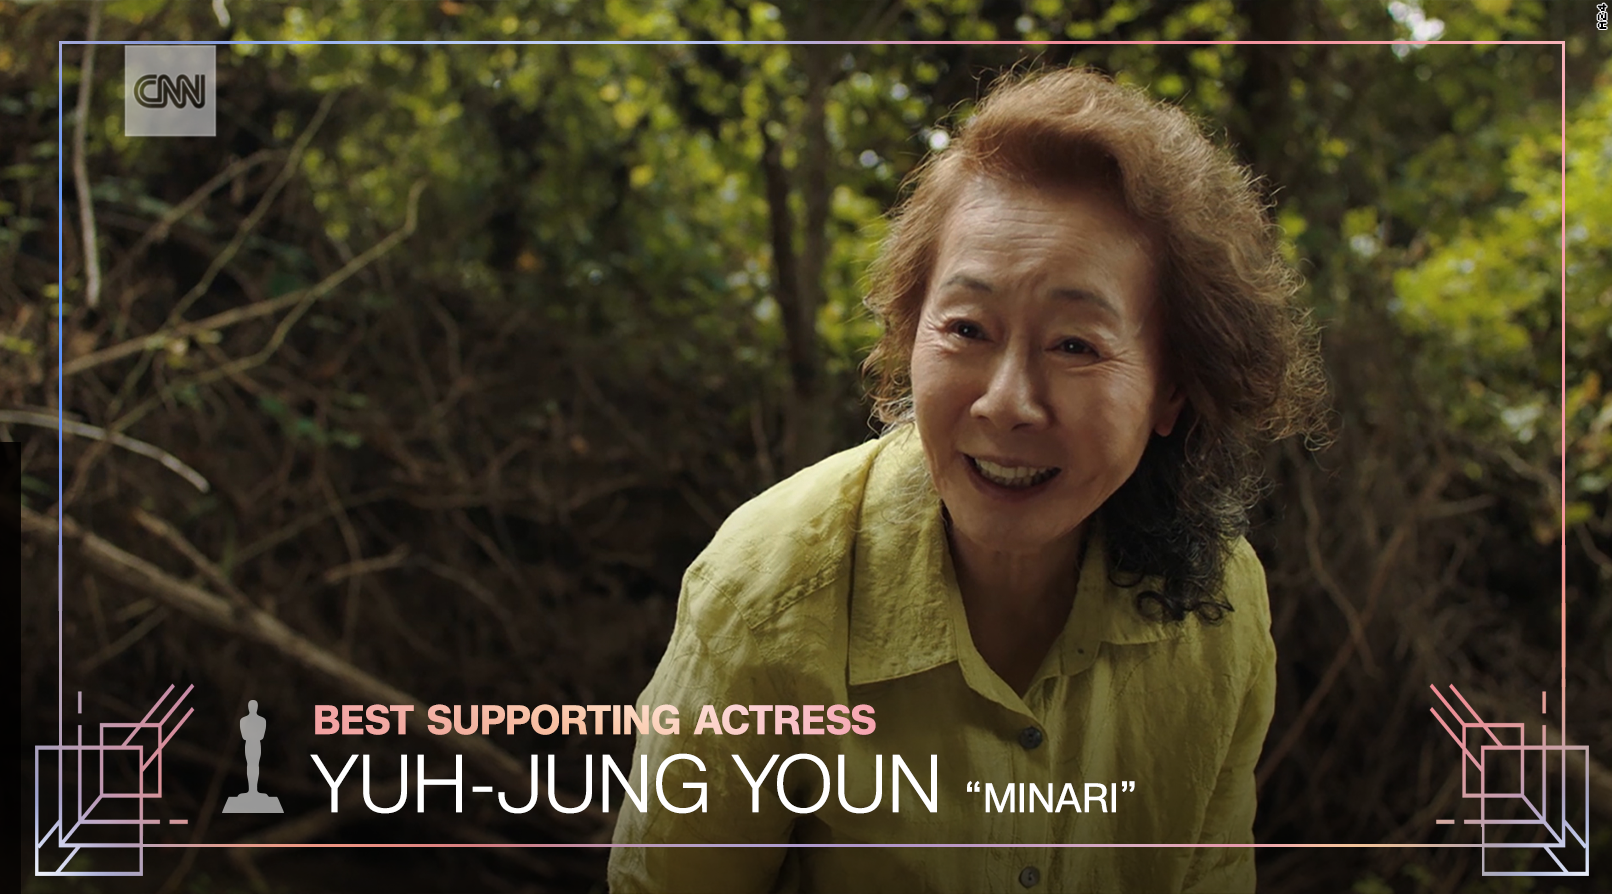 minari-star-yuh-jung-youn-becomes-first-korean-actress-to-win-for-best-supporting-role